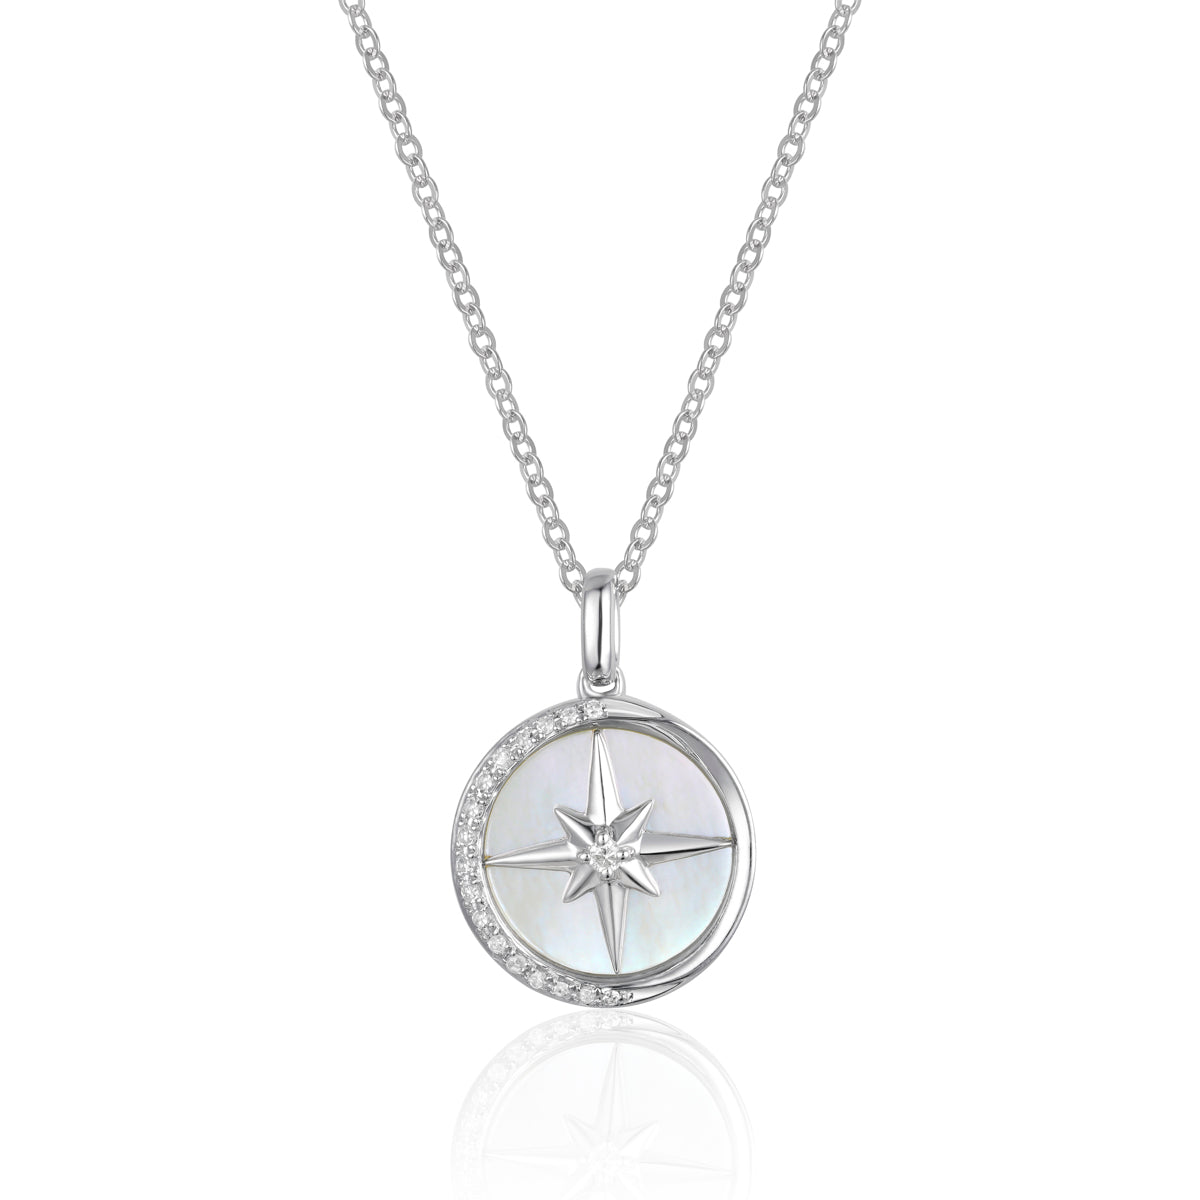 Luvente White Gold Round Mother of Pearl and Diamond Compass Style Pendant